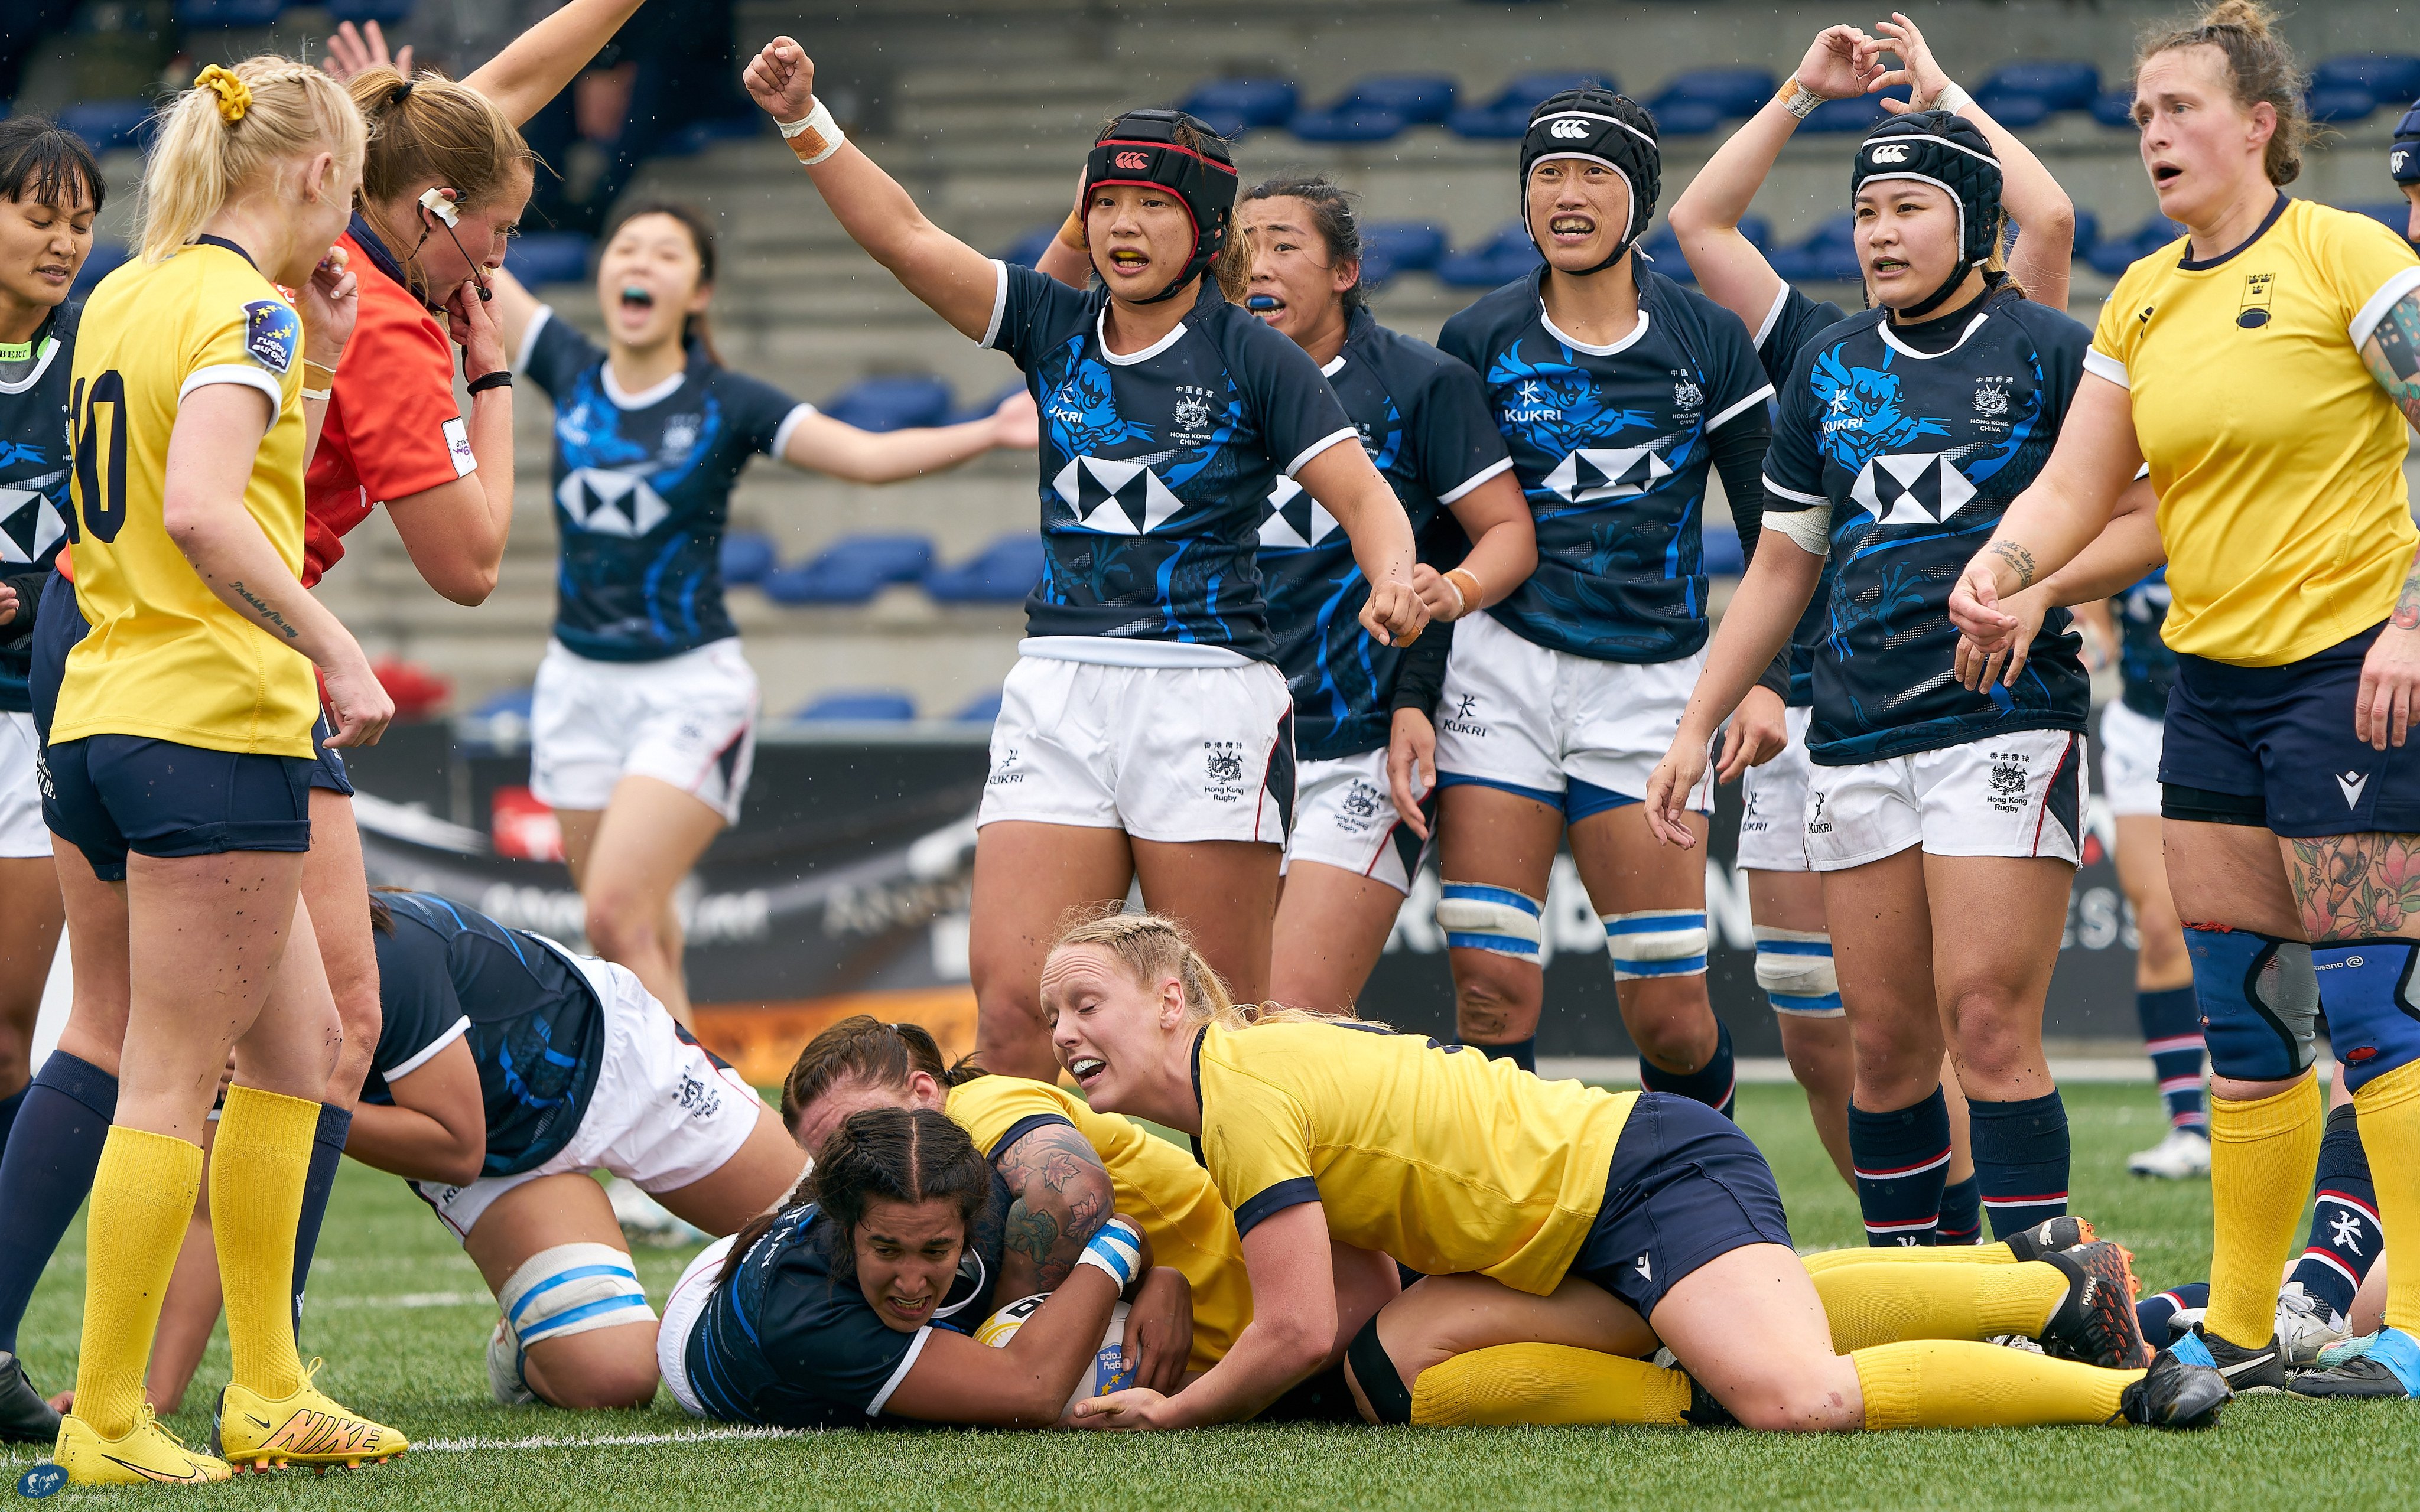 Hong Kong lock Roshini Turner scores her side’s first try against Sweden at the National Rugby Centre Stadium in Amsterdam. Photo: Erik den Burger/HKRU